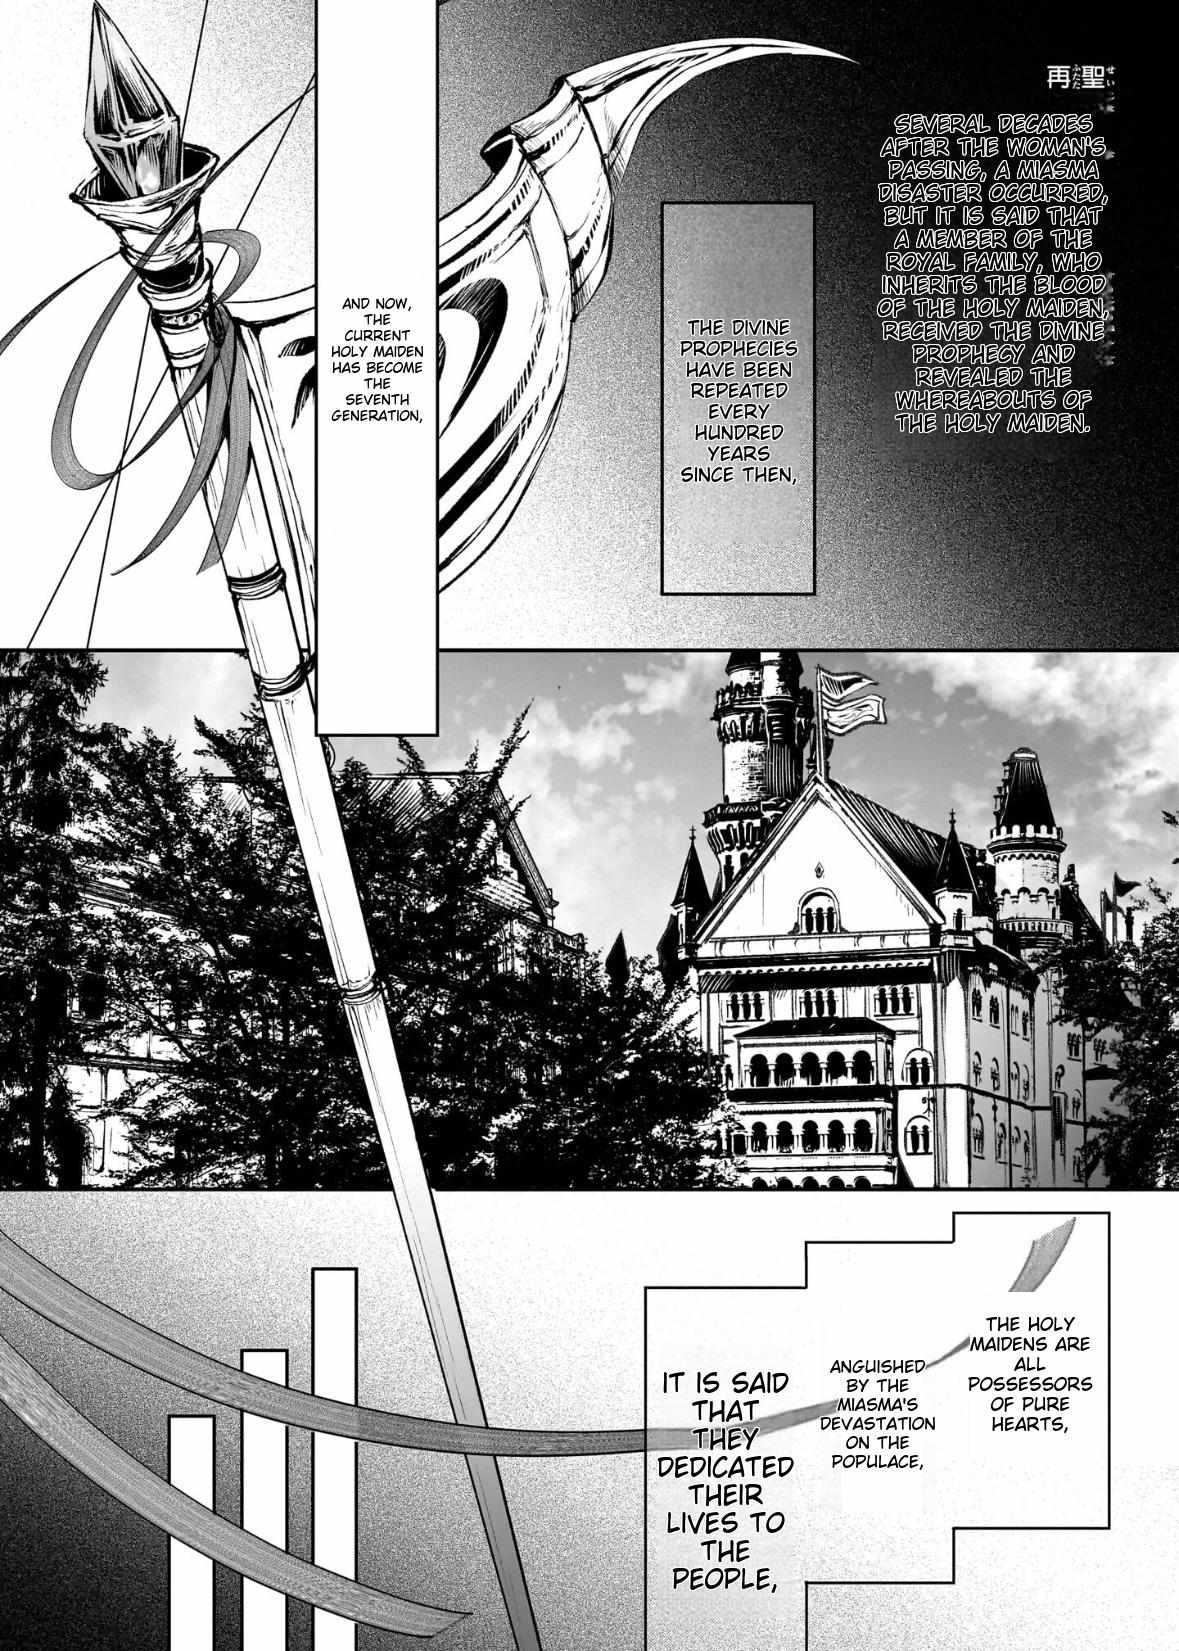 The Affairs Of The Other World Depend On The Corporate Slave Vol.4 Chapter 20 - Picture 3